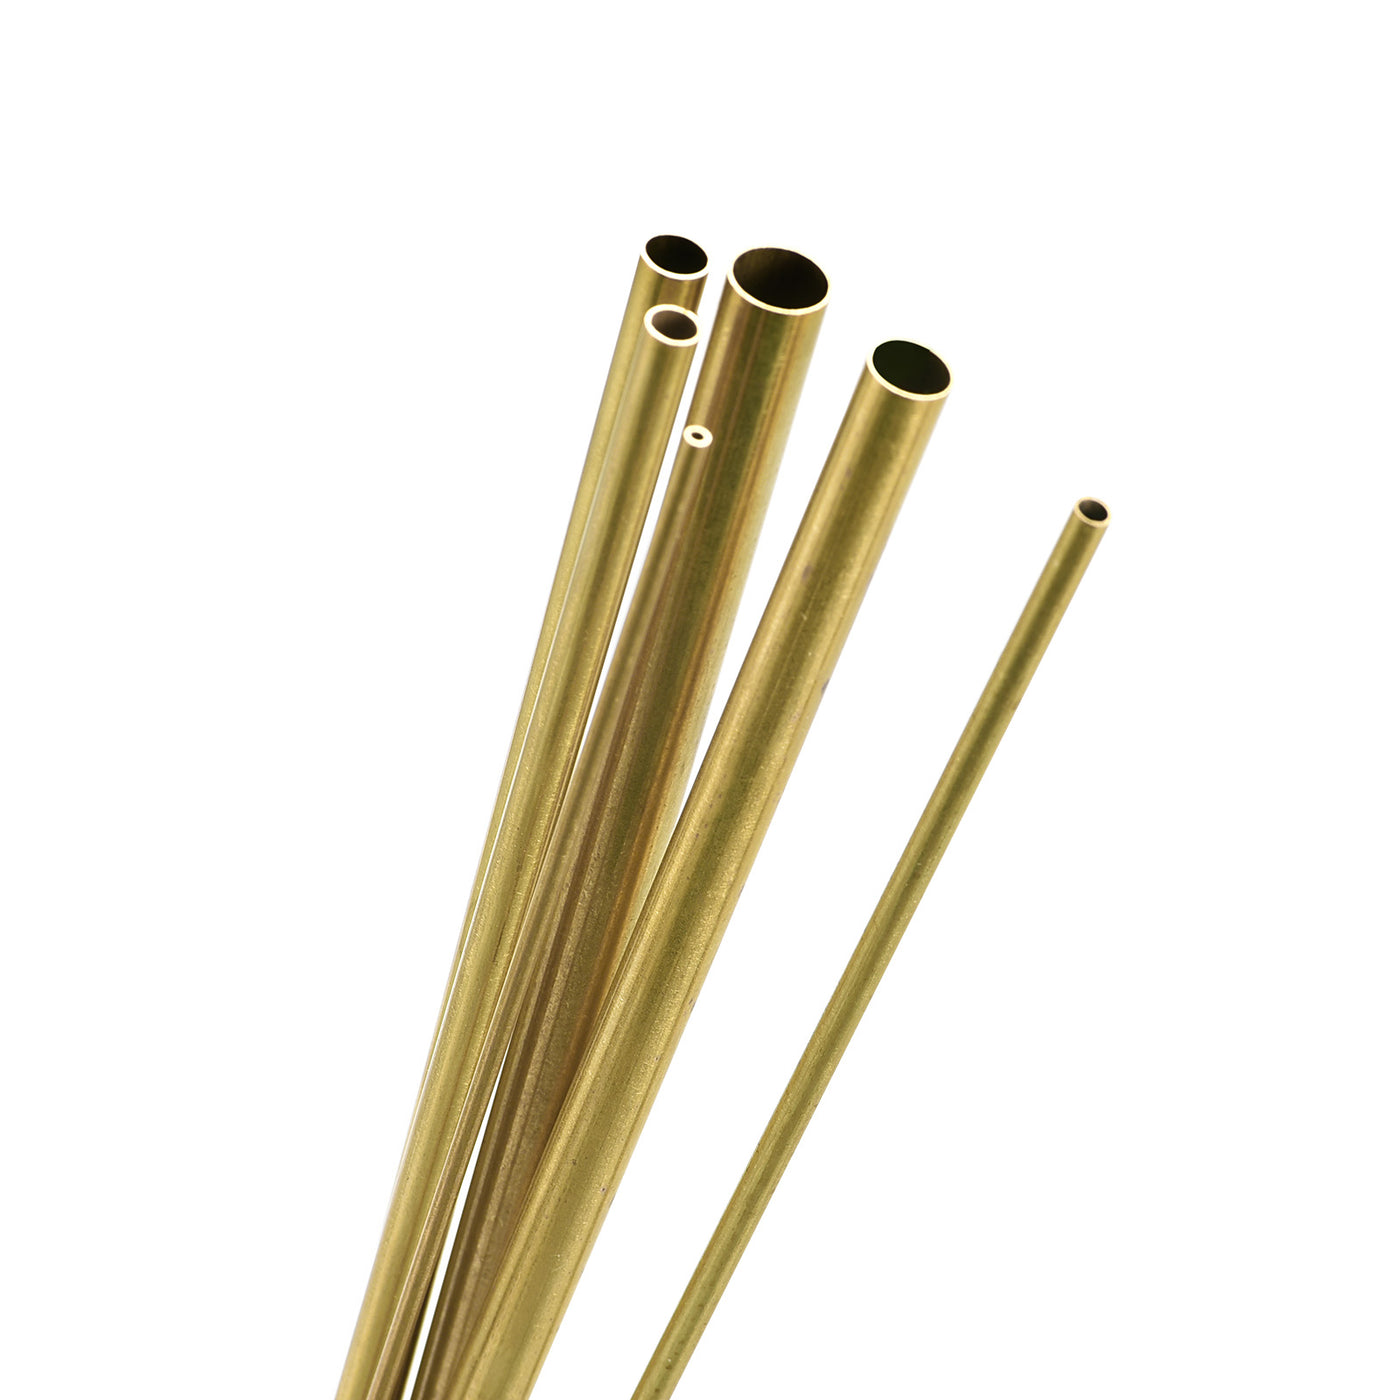 uxcell Uxcell Brass Tube, 2.5mm 3.5mm 4.5mm 5.5mm 6.5mm 7.5mm OD x 0.5mm Wall Thickness 300mm Length Metal Tubing, Pack of 6